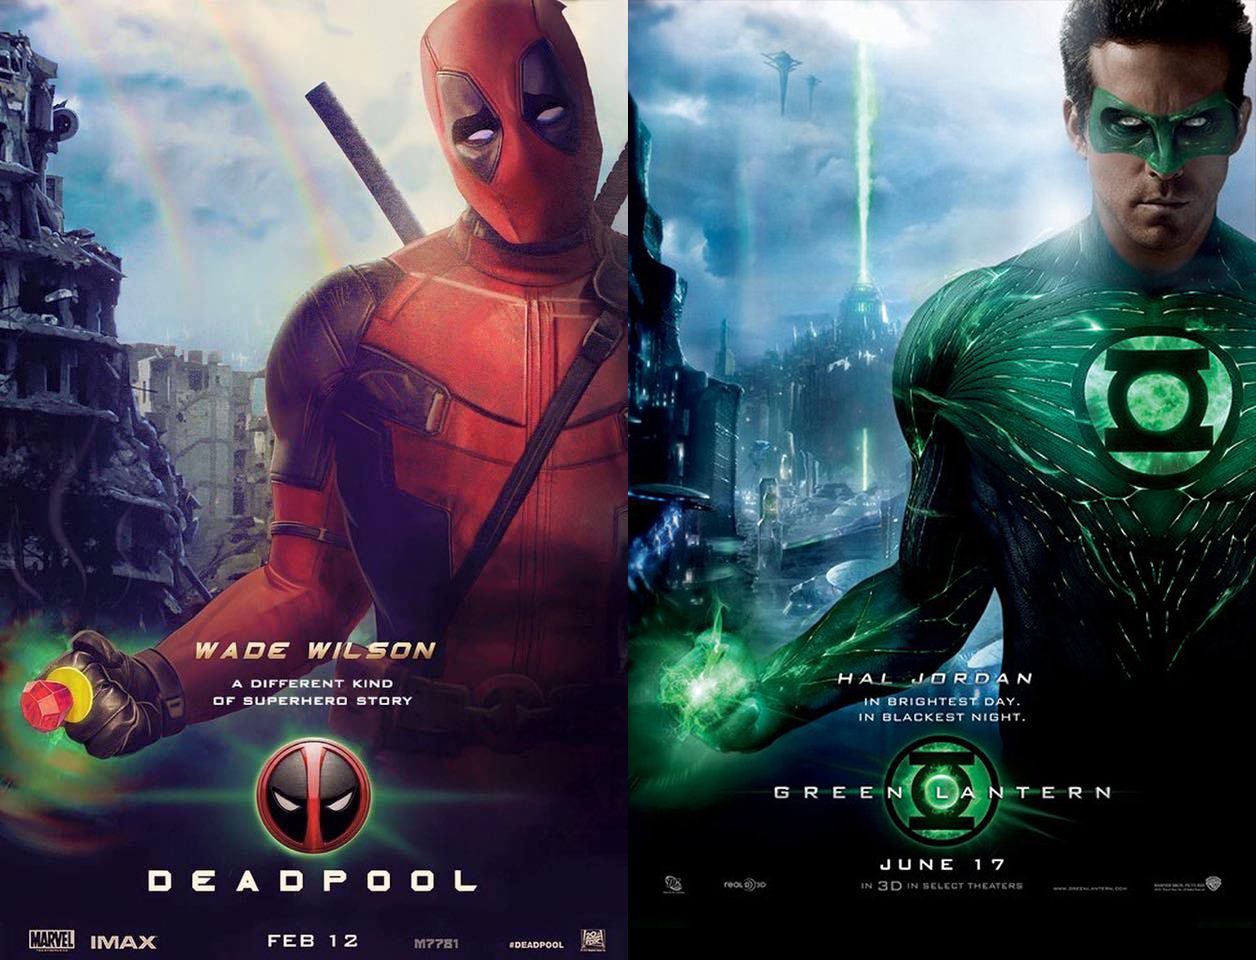 Request Will somebody turn this deadpool green lantern image into a dual monitor wallpaper?